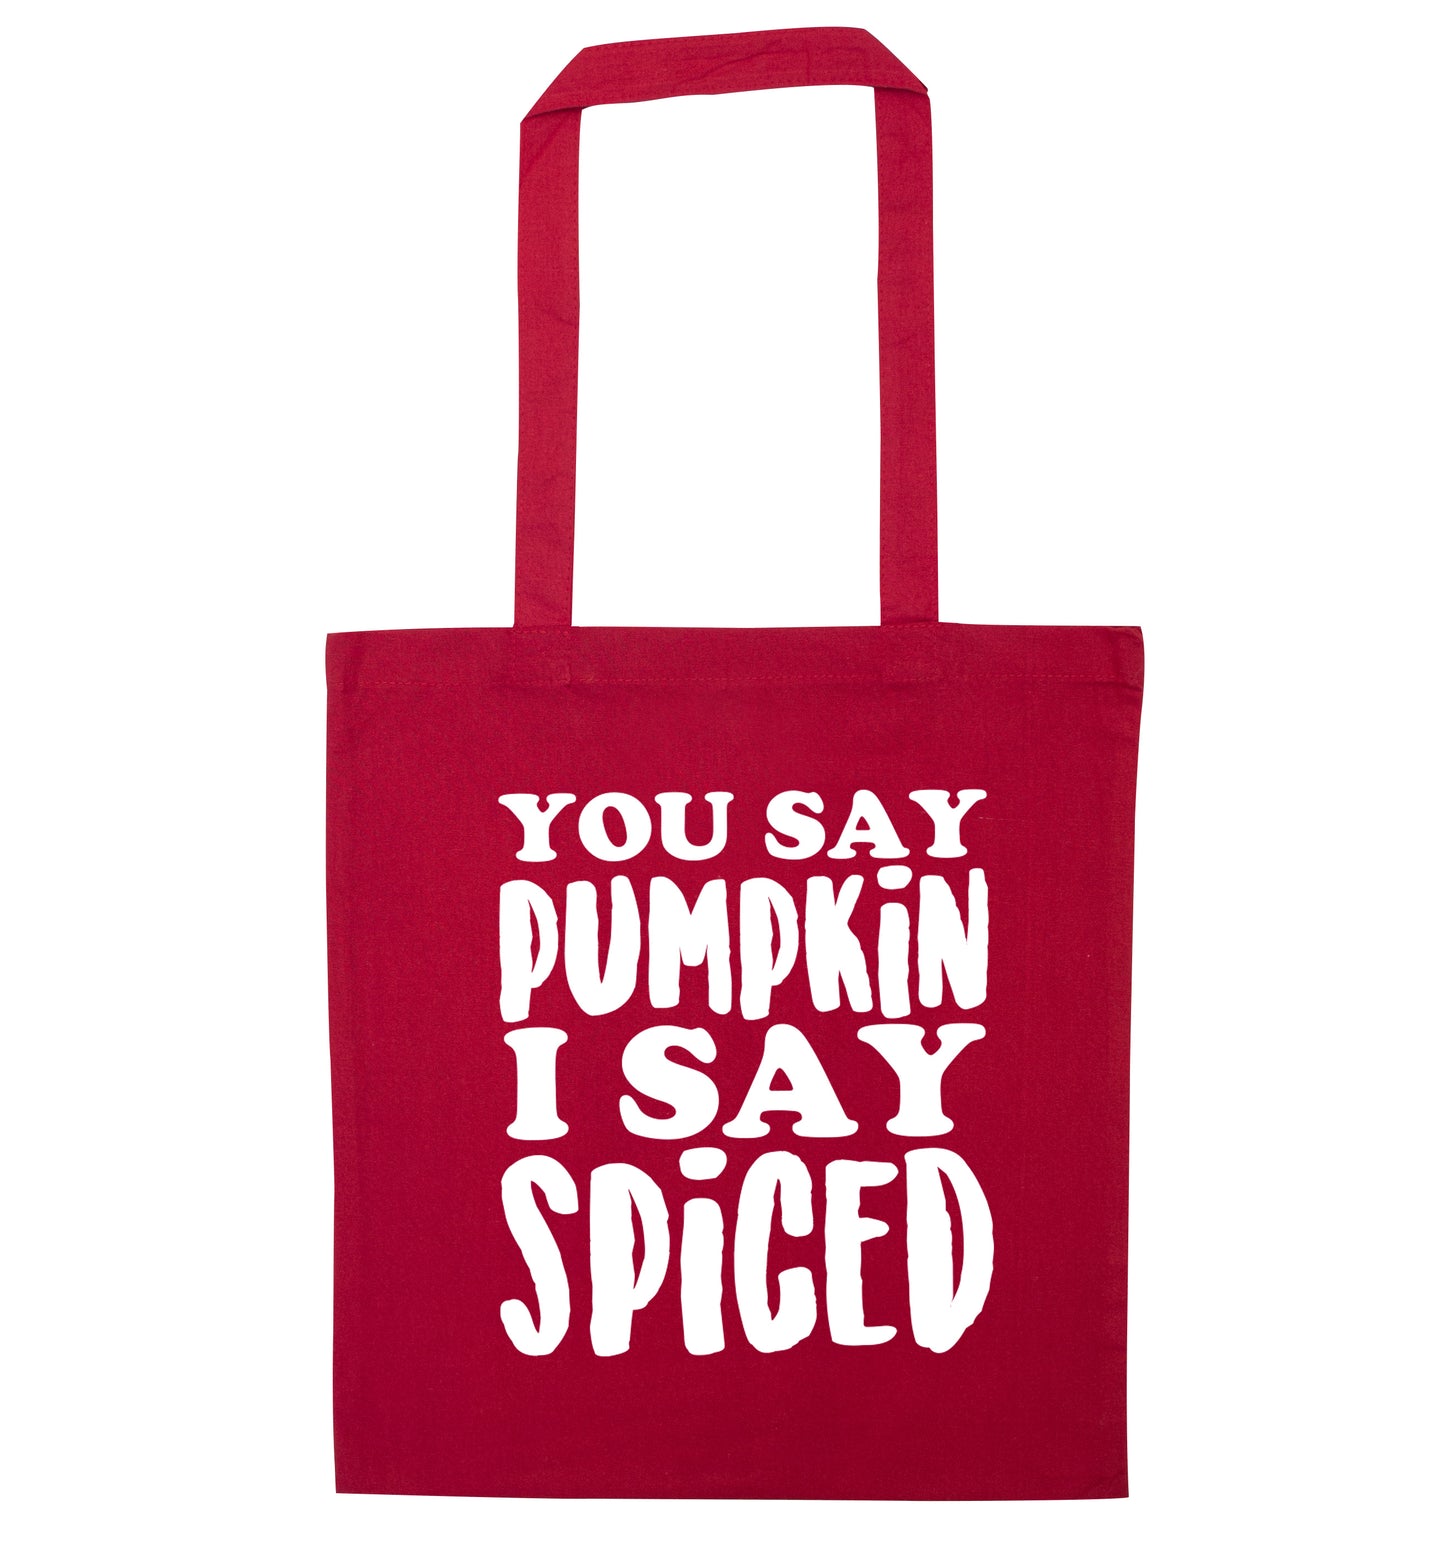 You say pumpkin I say spiced! red tote bag